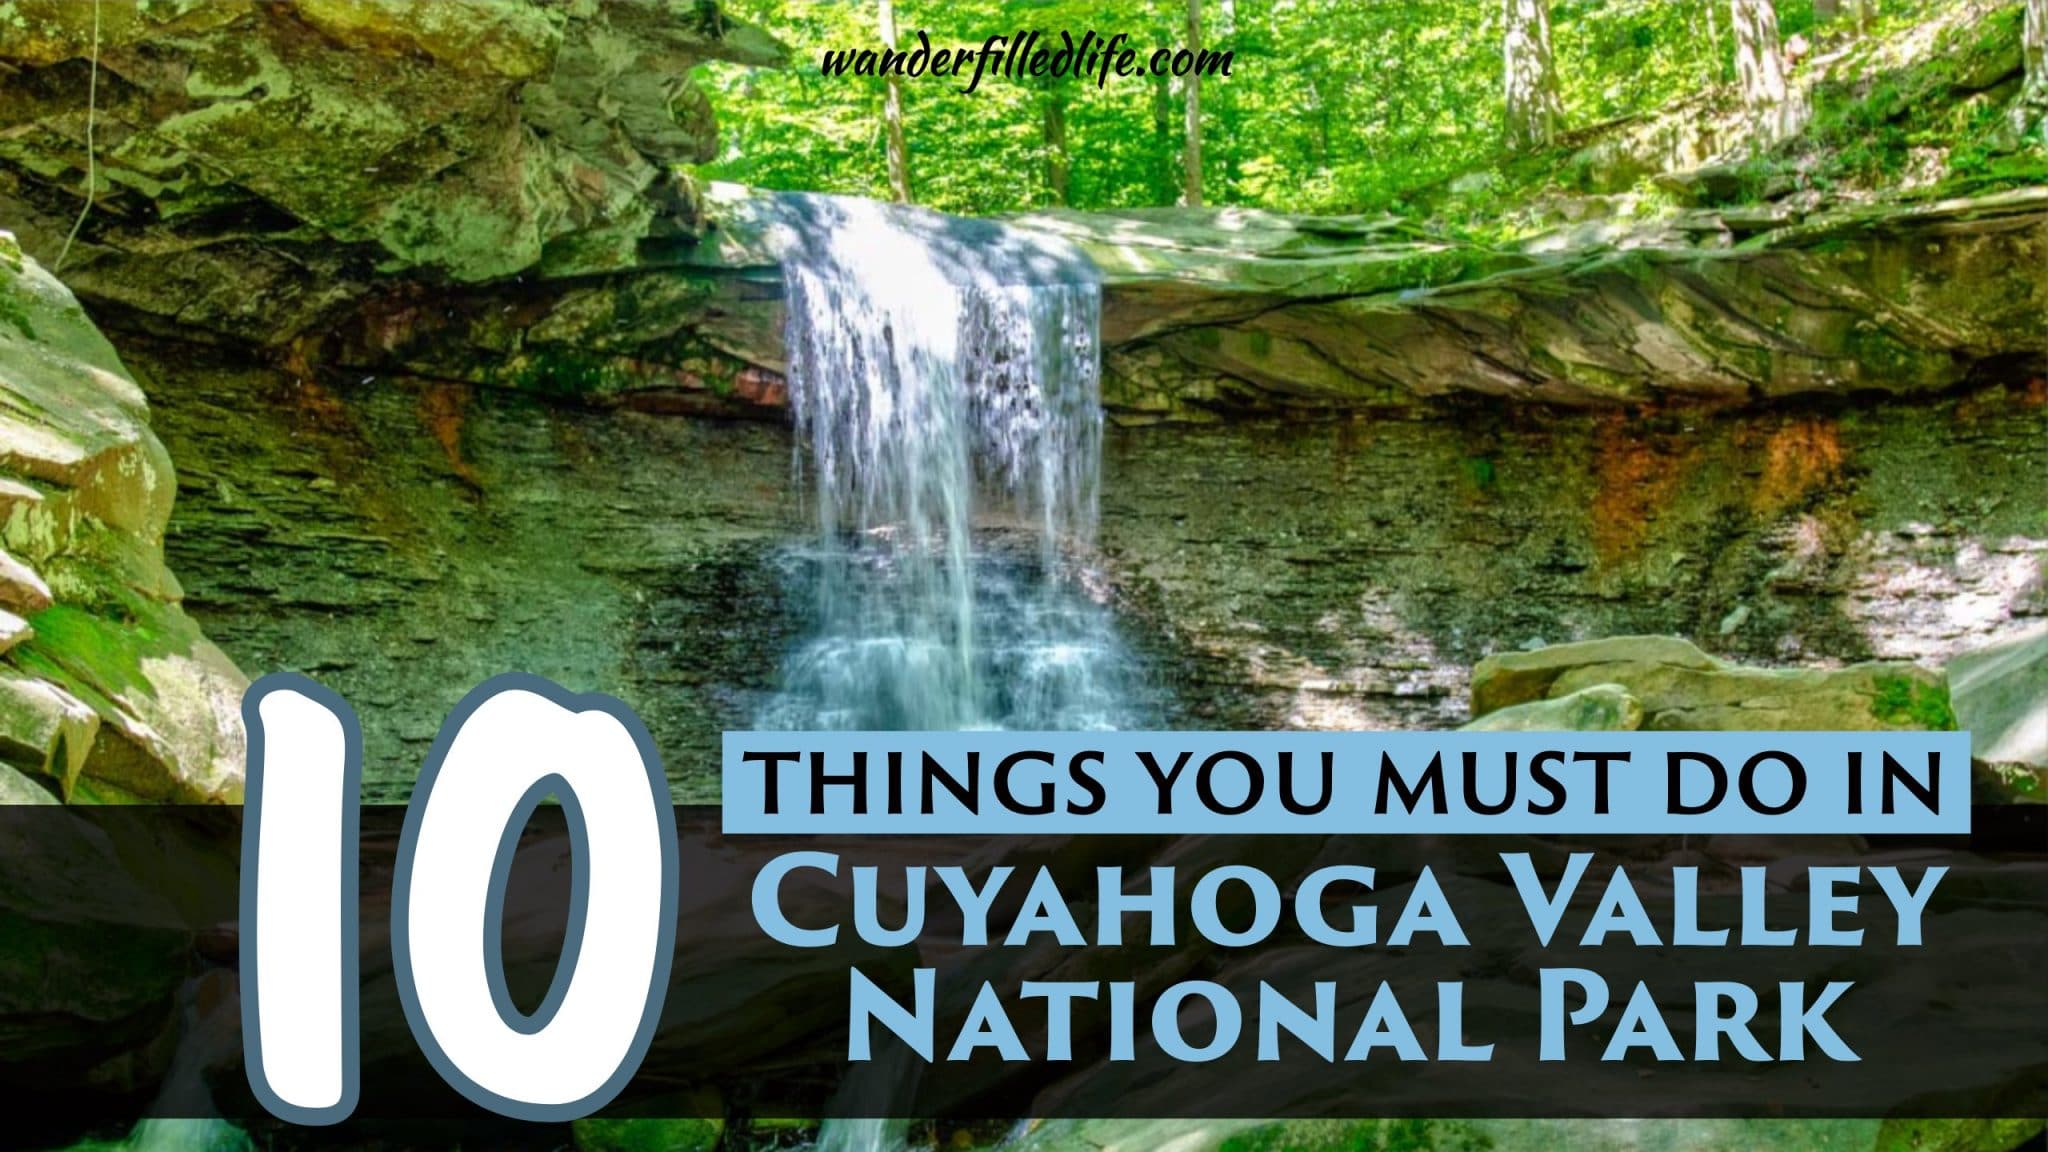 10 Things to Do in Cuyahoga Valley National Park